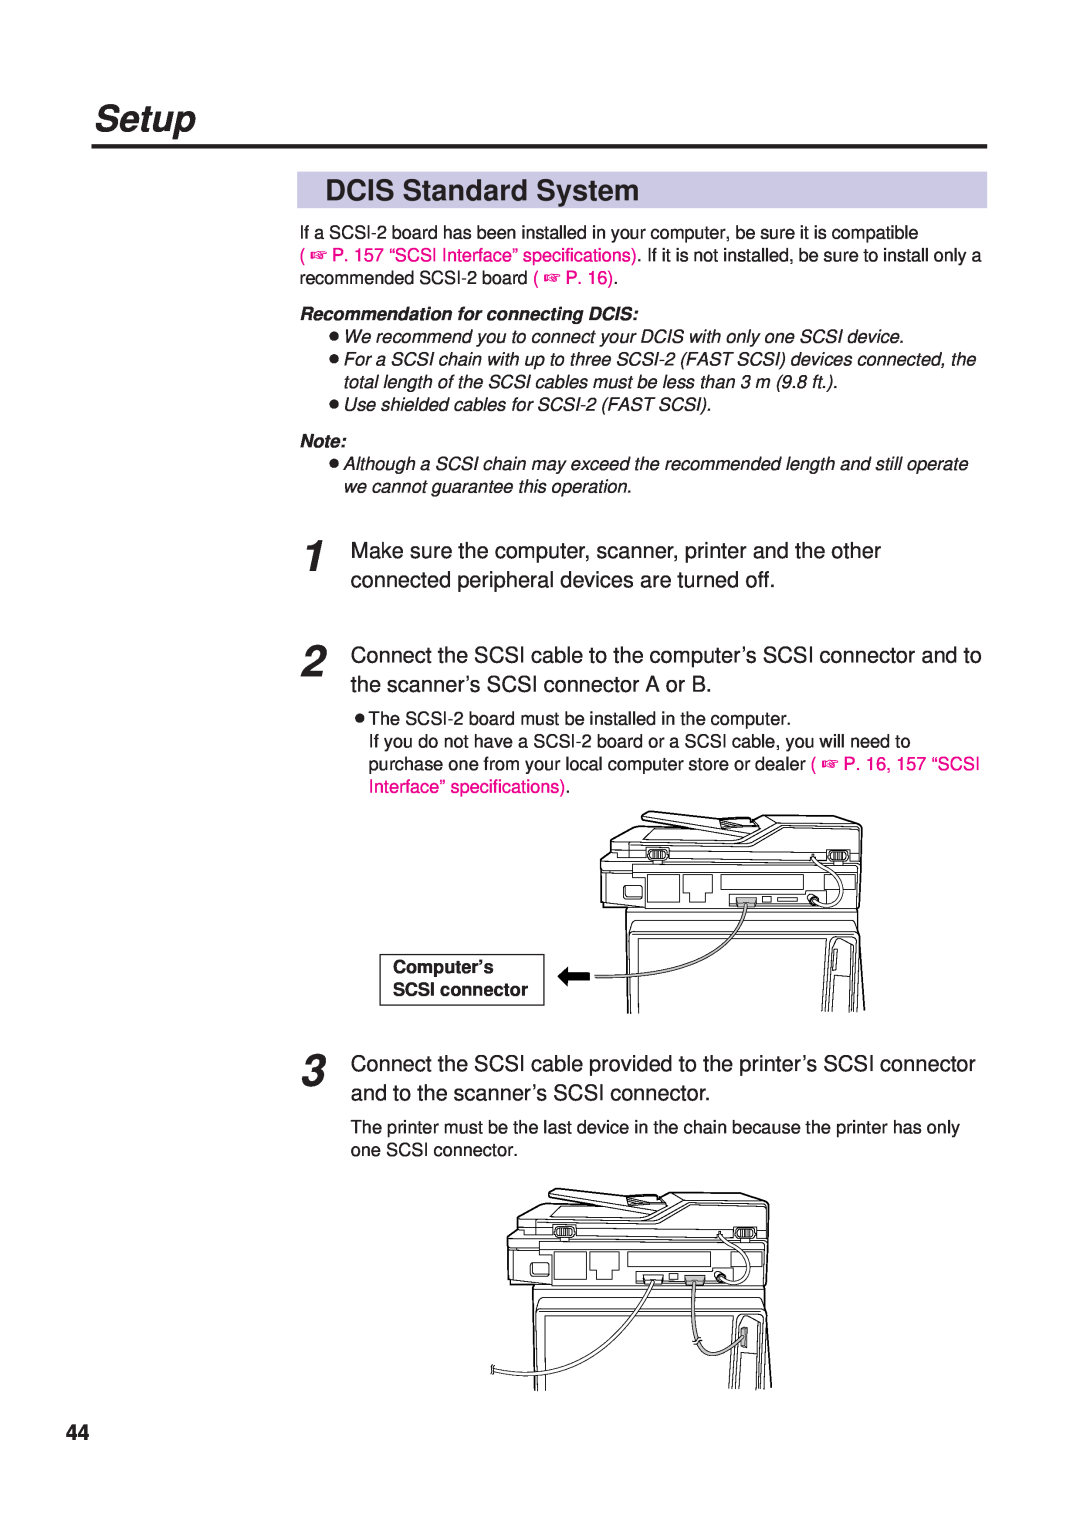 Panasonic KX-PS8000 manual DCIS Standard System, Make sure the computer, scanner, printer and the other, Setup, Computer’s 